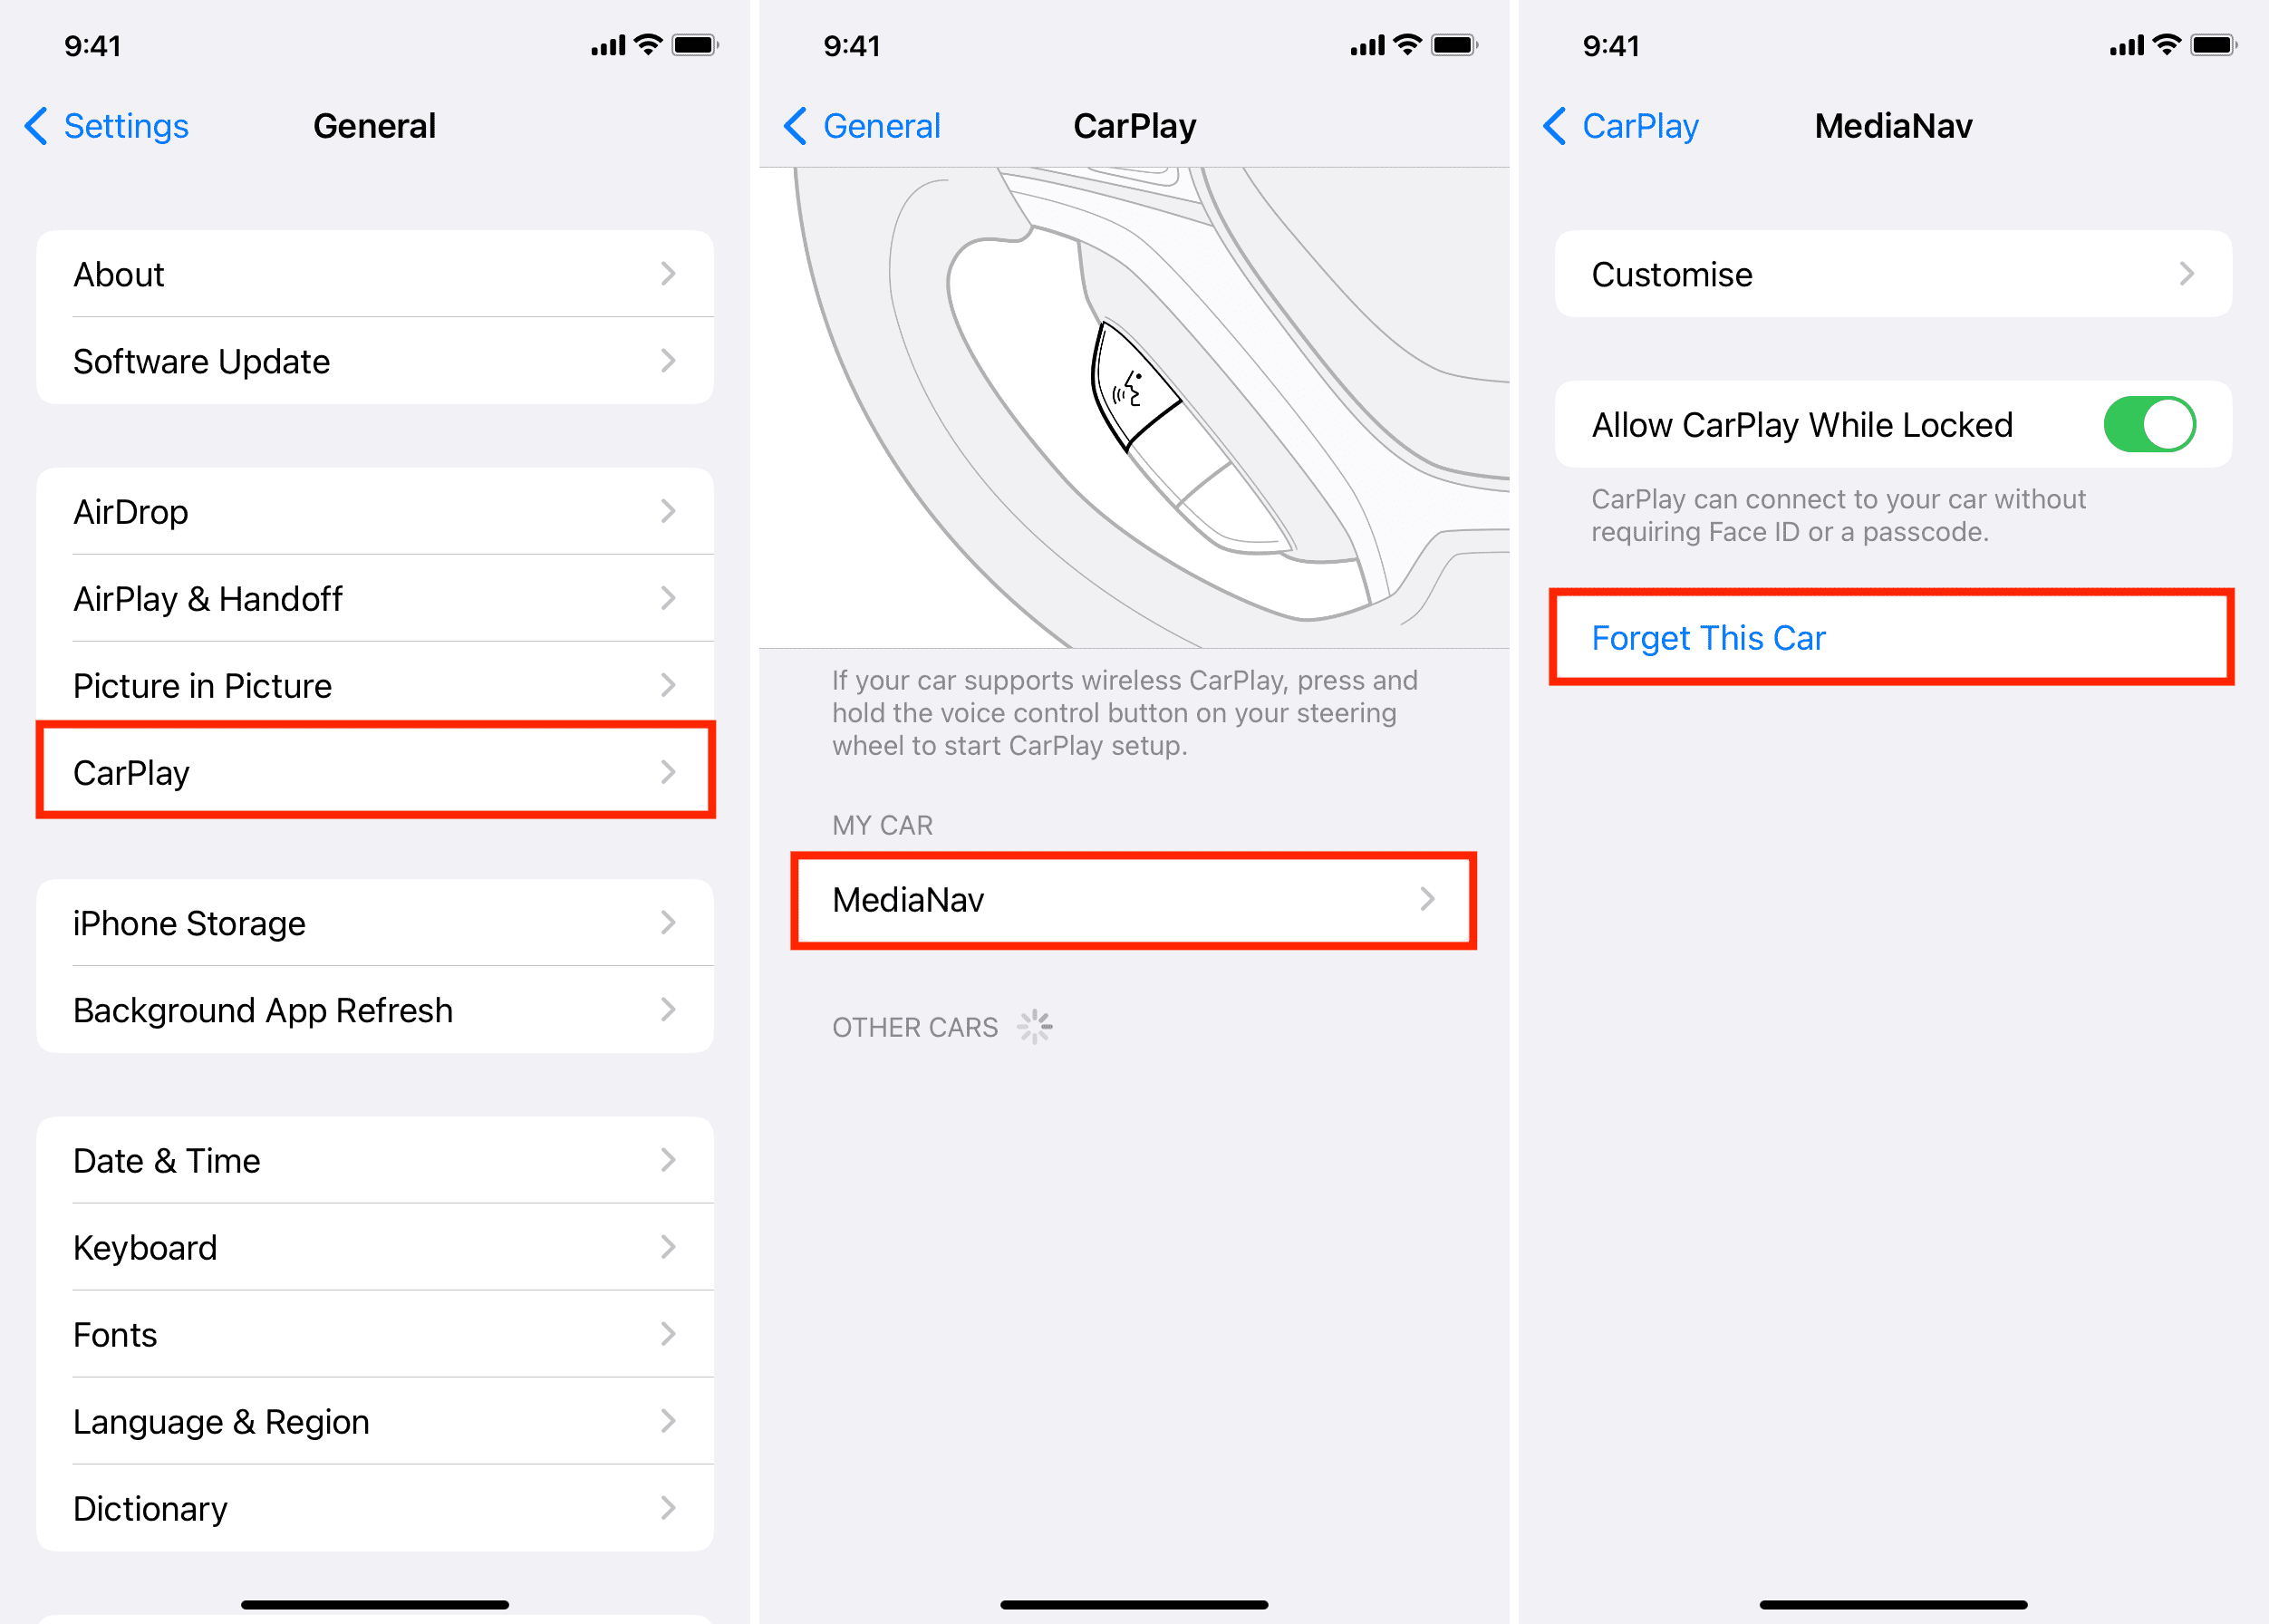 Forget This Car in iPhone CarPlay settings to turn off CarPlay